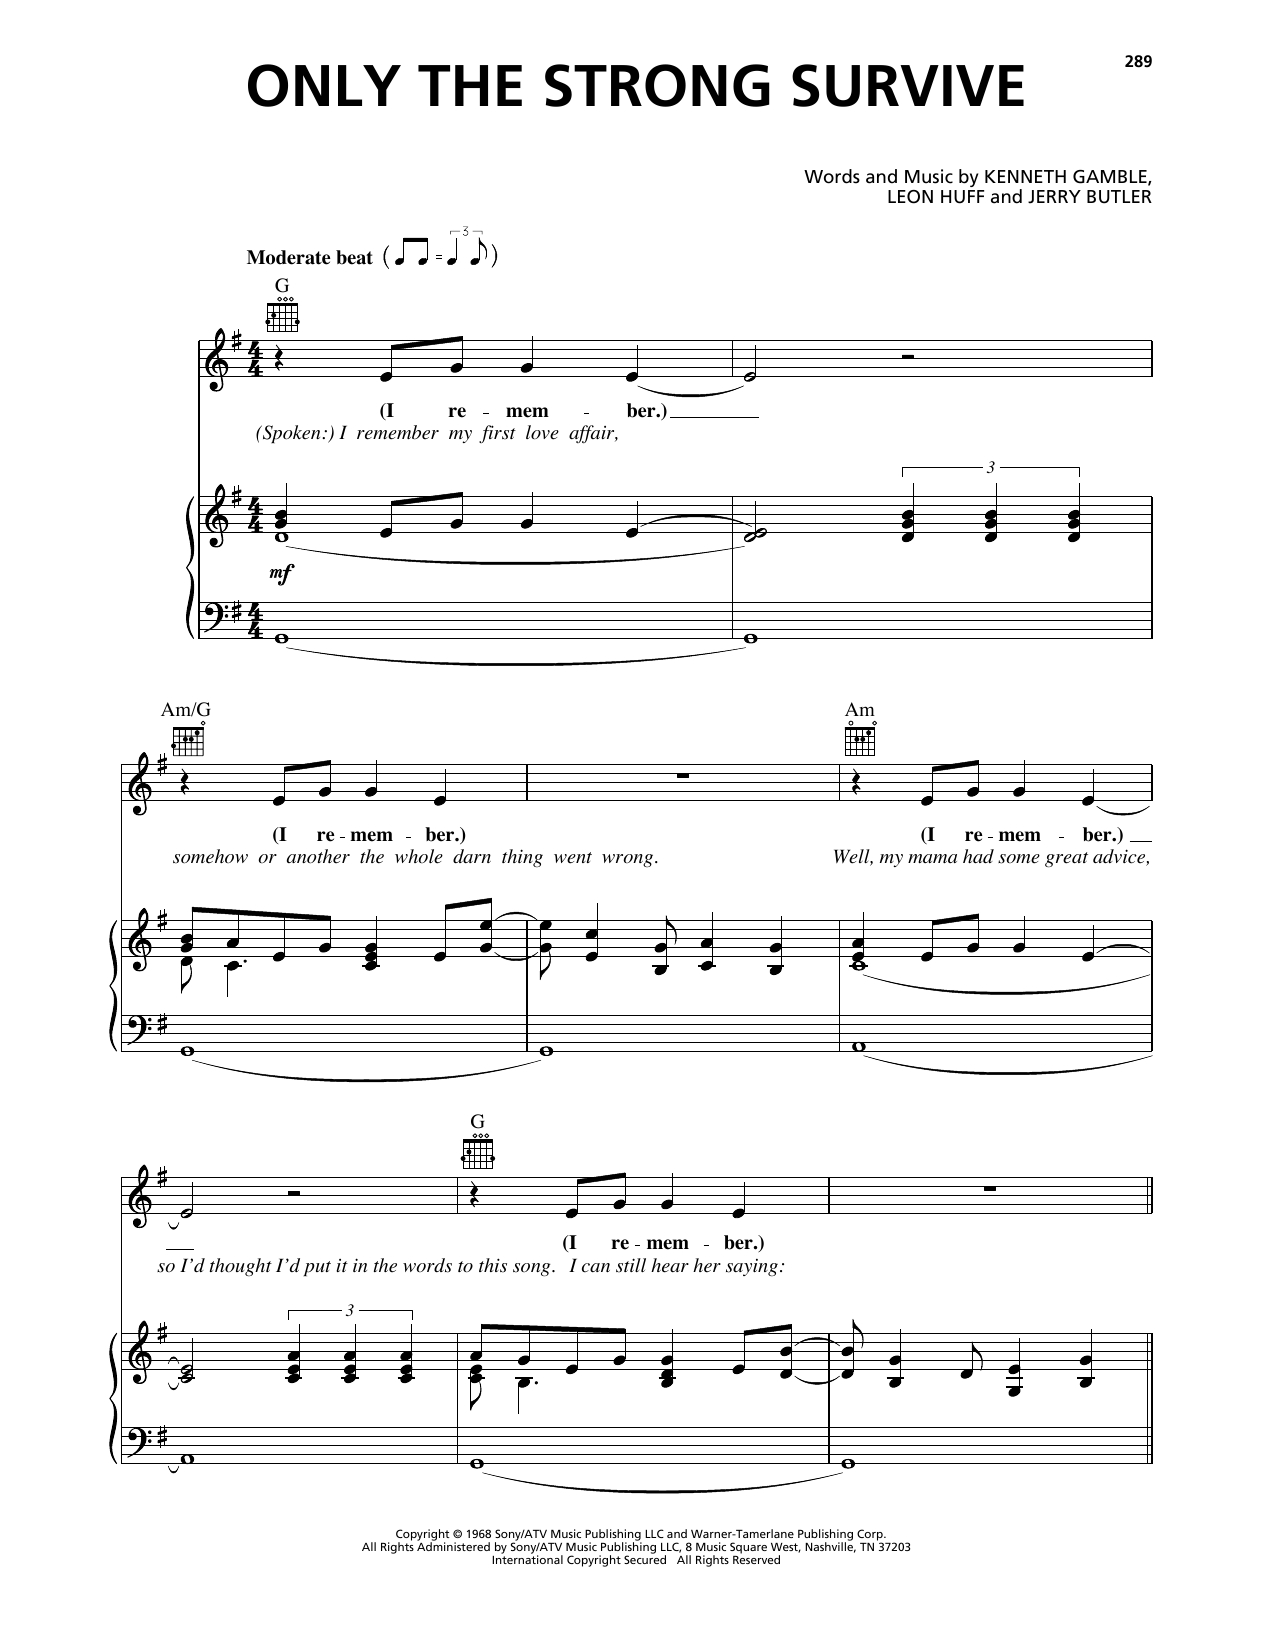 Download Elvis Presley Only The Strong Survive Sheet Music